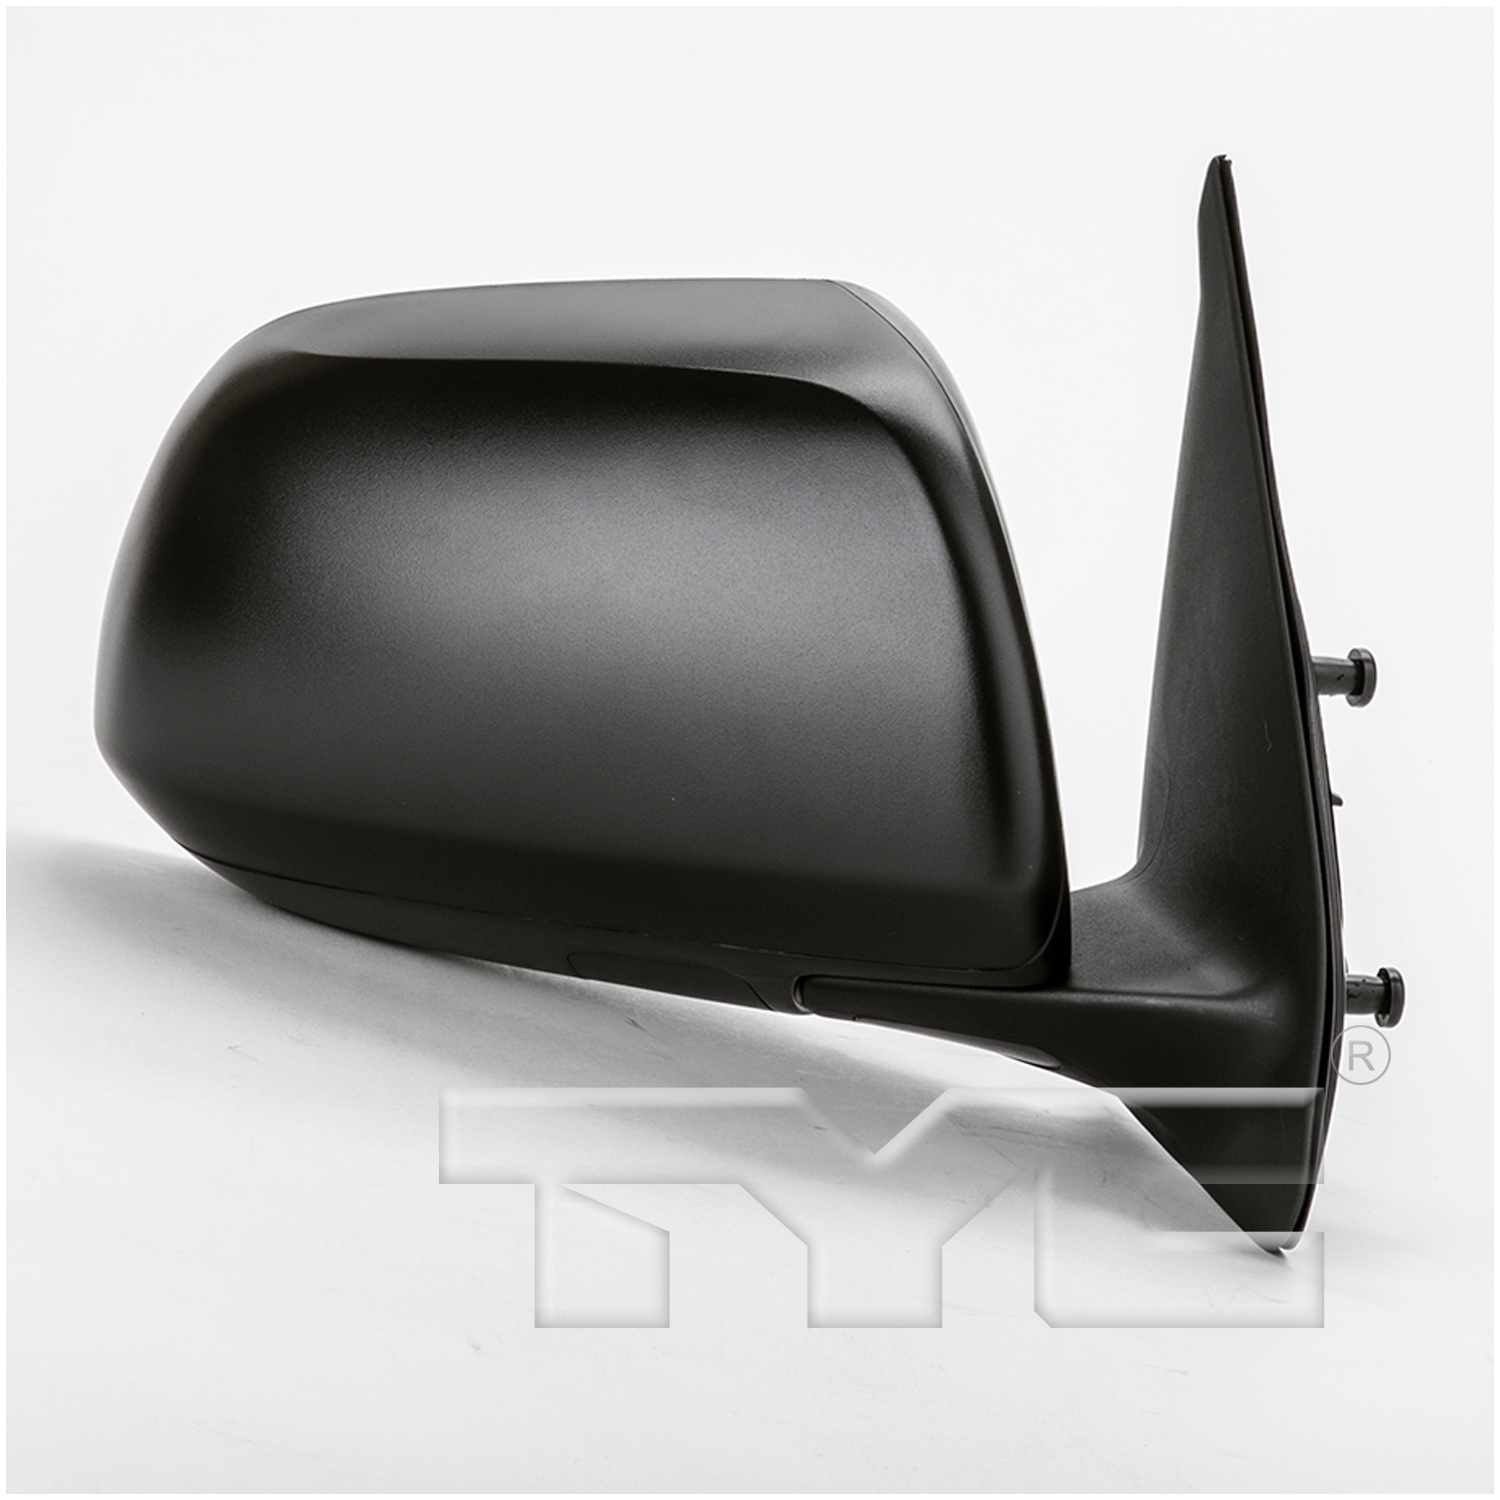 Aftermarket MIRRORS for TOYOTA - TACOMA, TACOMA,12-15,RT Mirror outside rear view